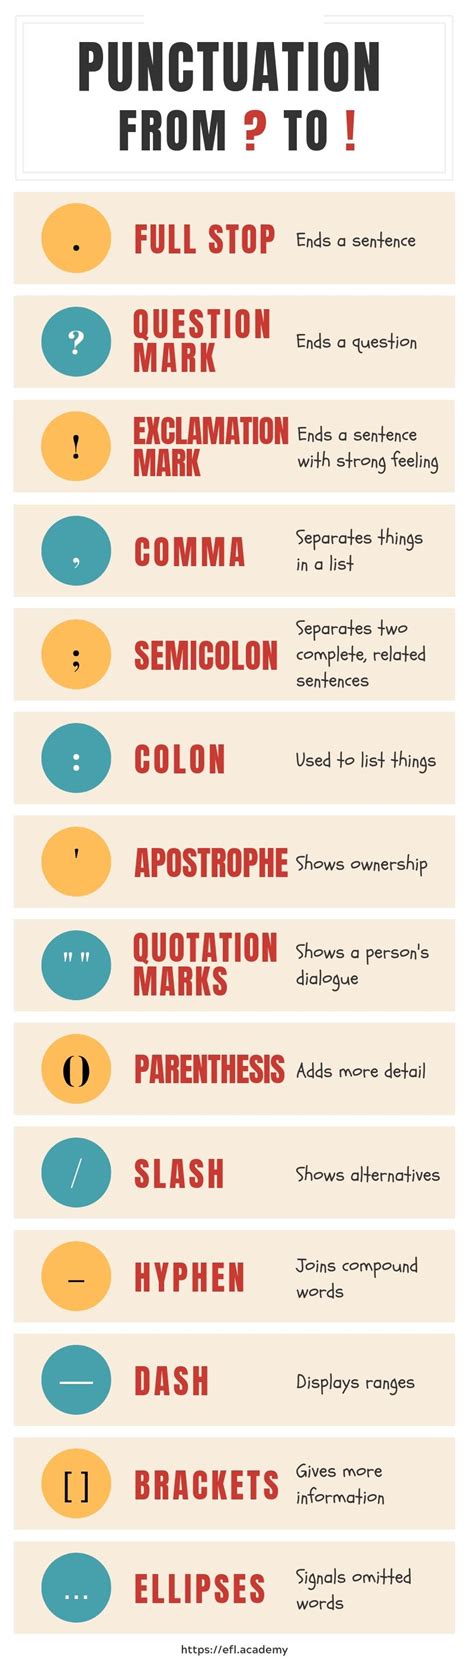 Punctuation Marks Guide